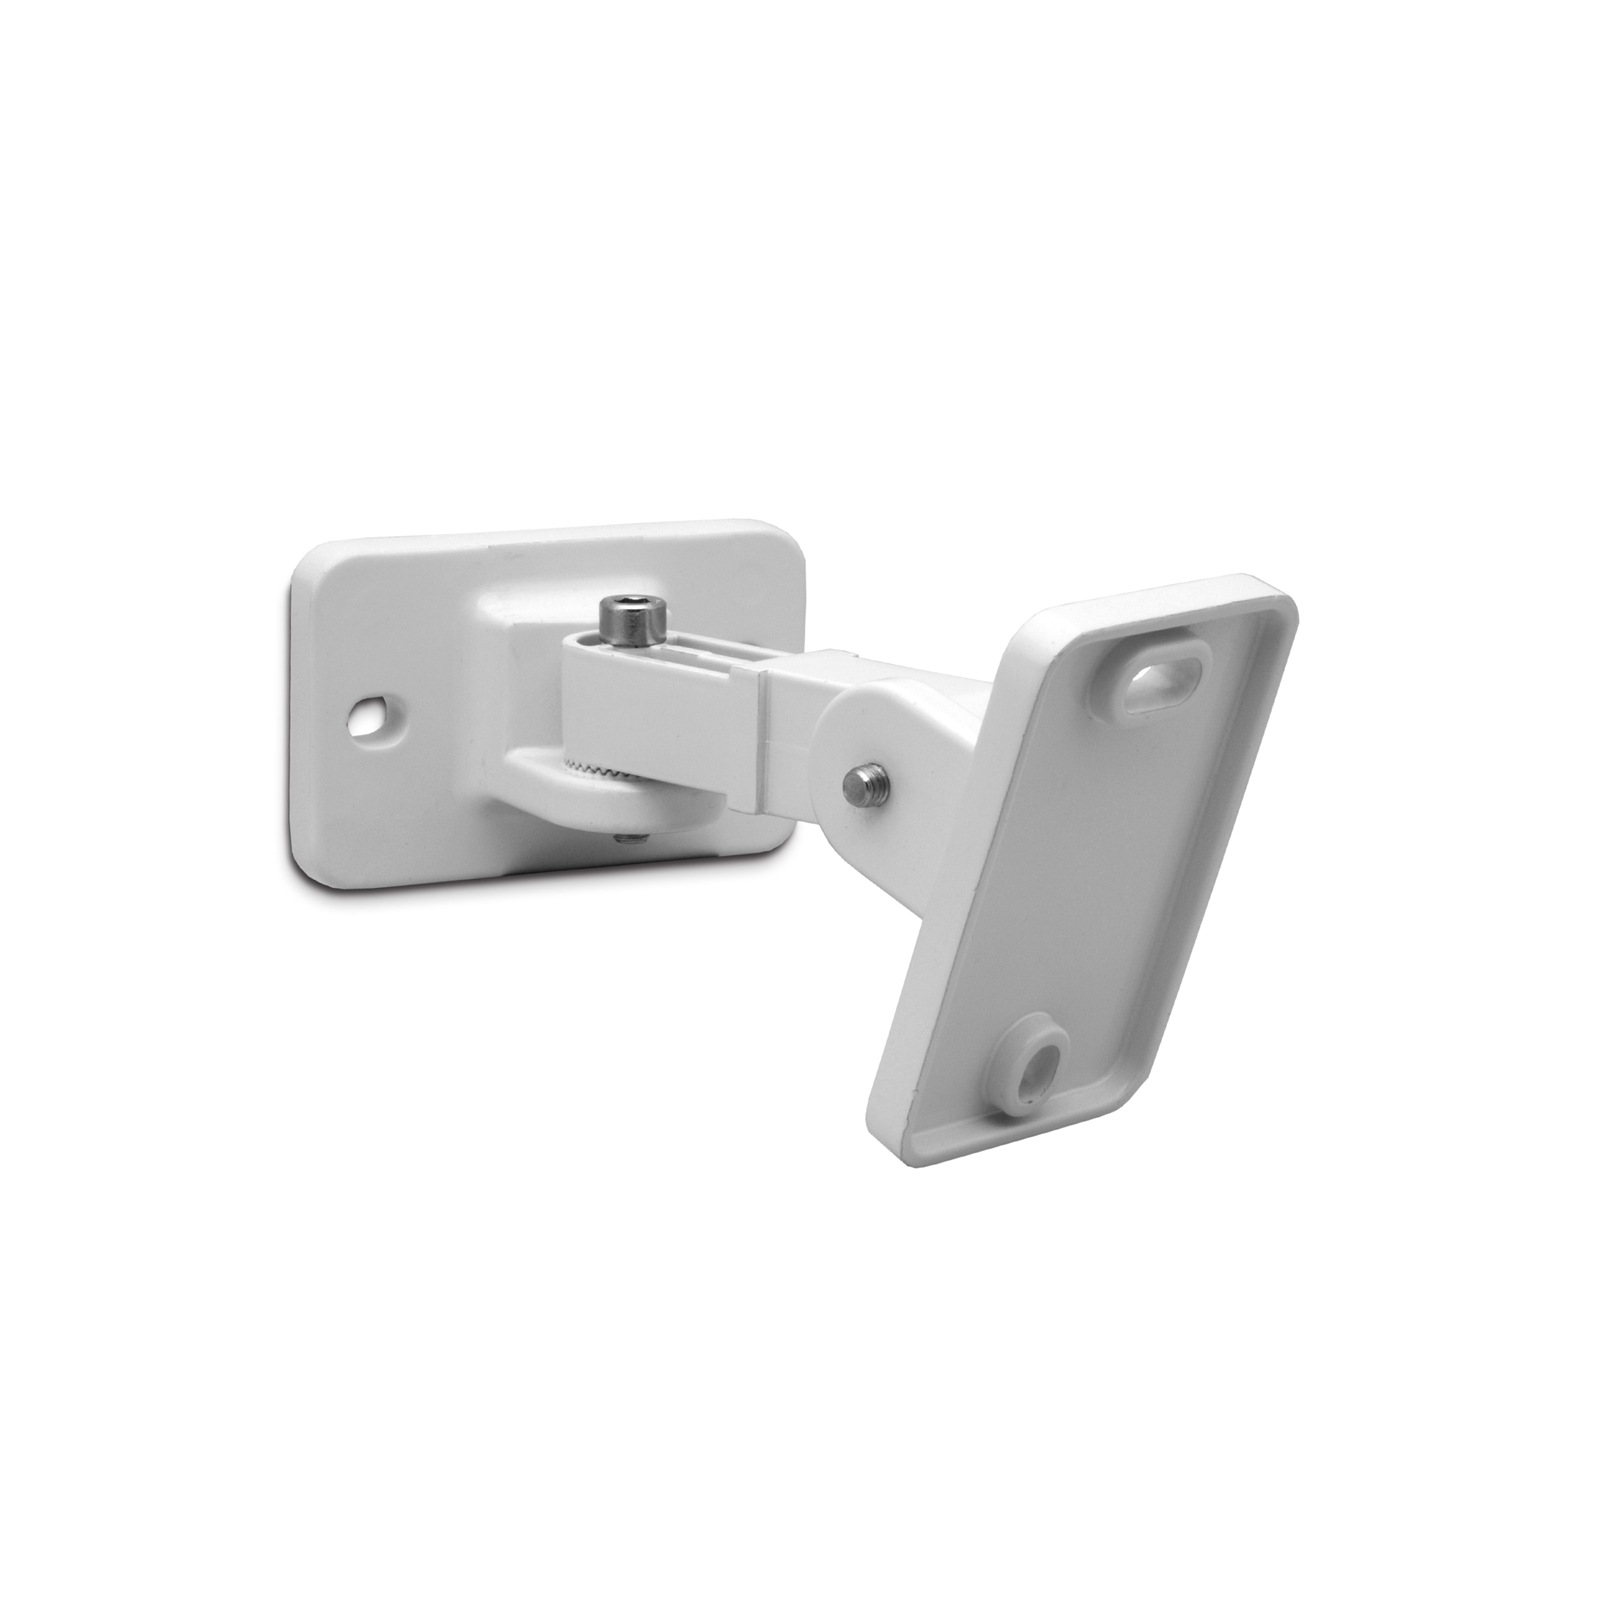 Apart White bracket for easy tilting and rotating of VINCI4-W & VINCI5-W. Priced